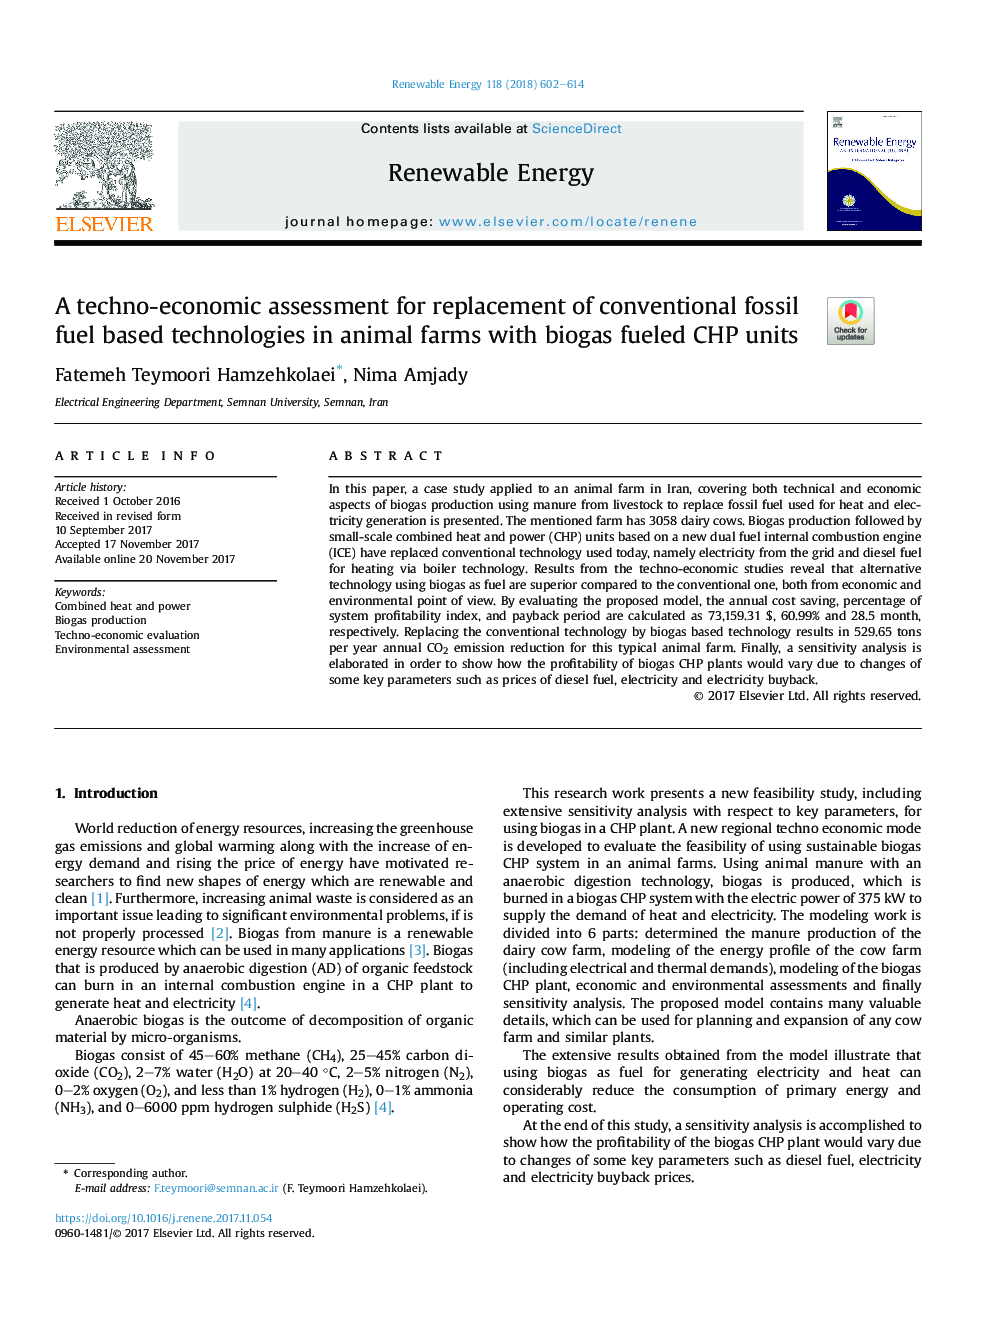 A techno-economic assessment for replacement of conventional fossil fuel based technologies in animal farms with biogas fueled CHP units